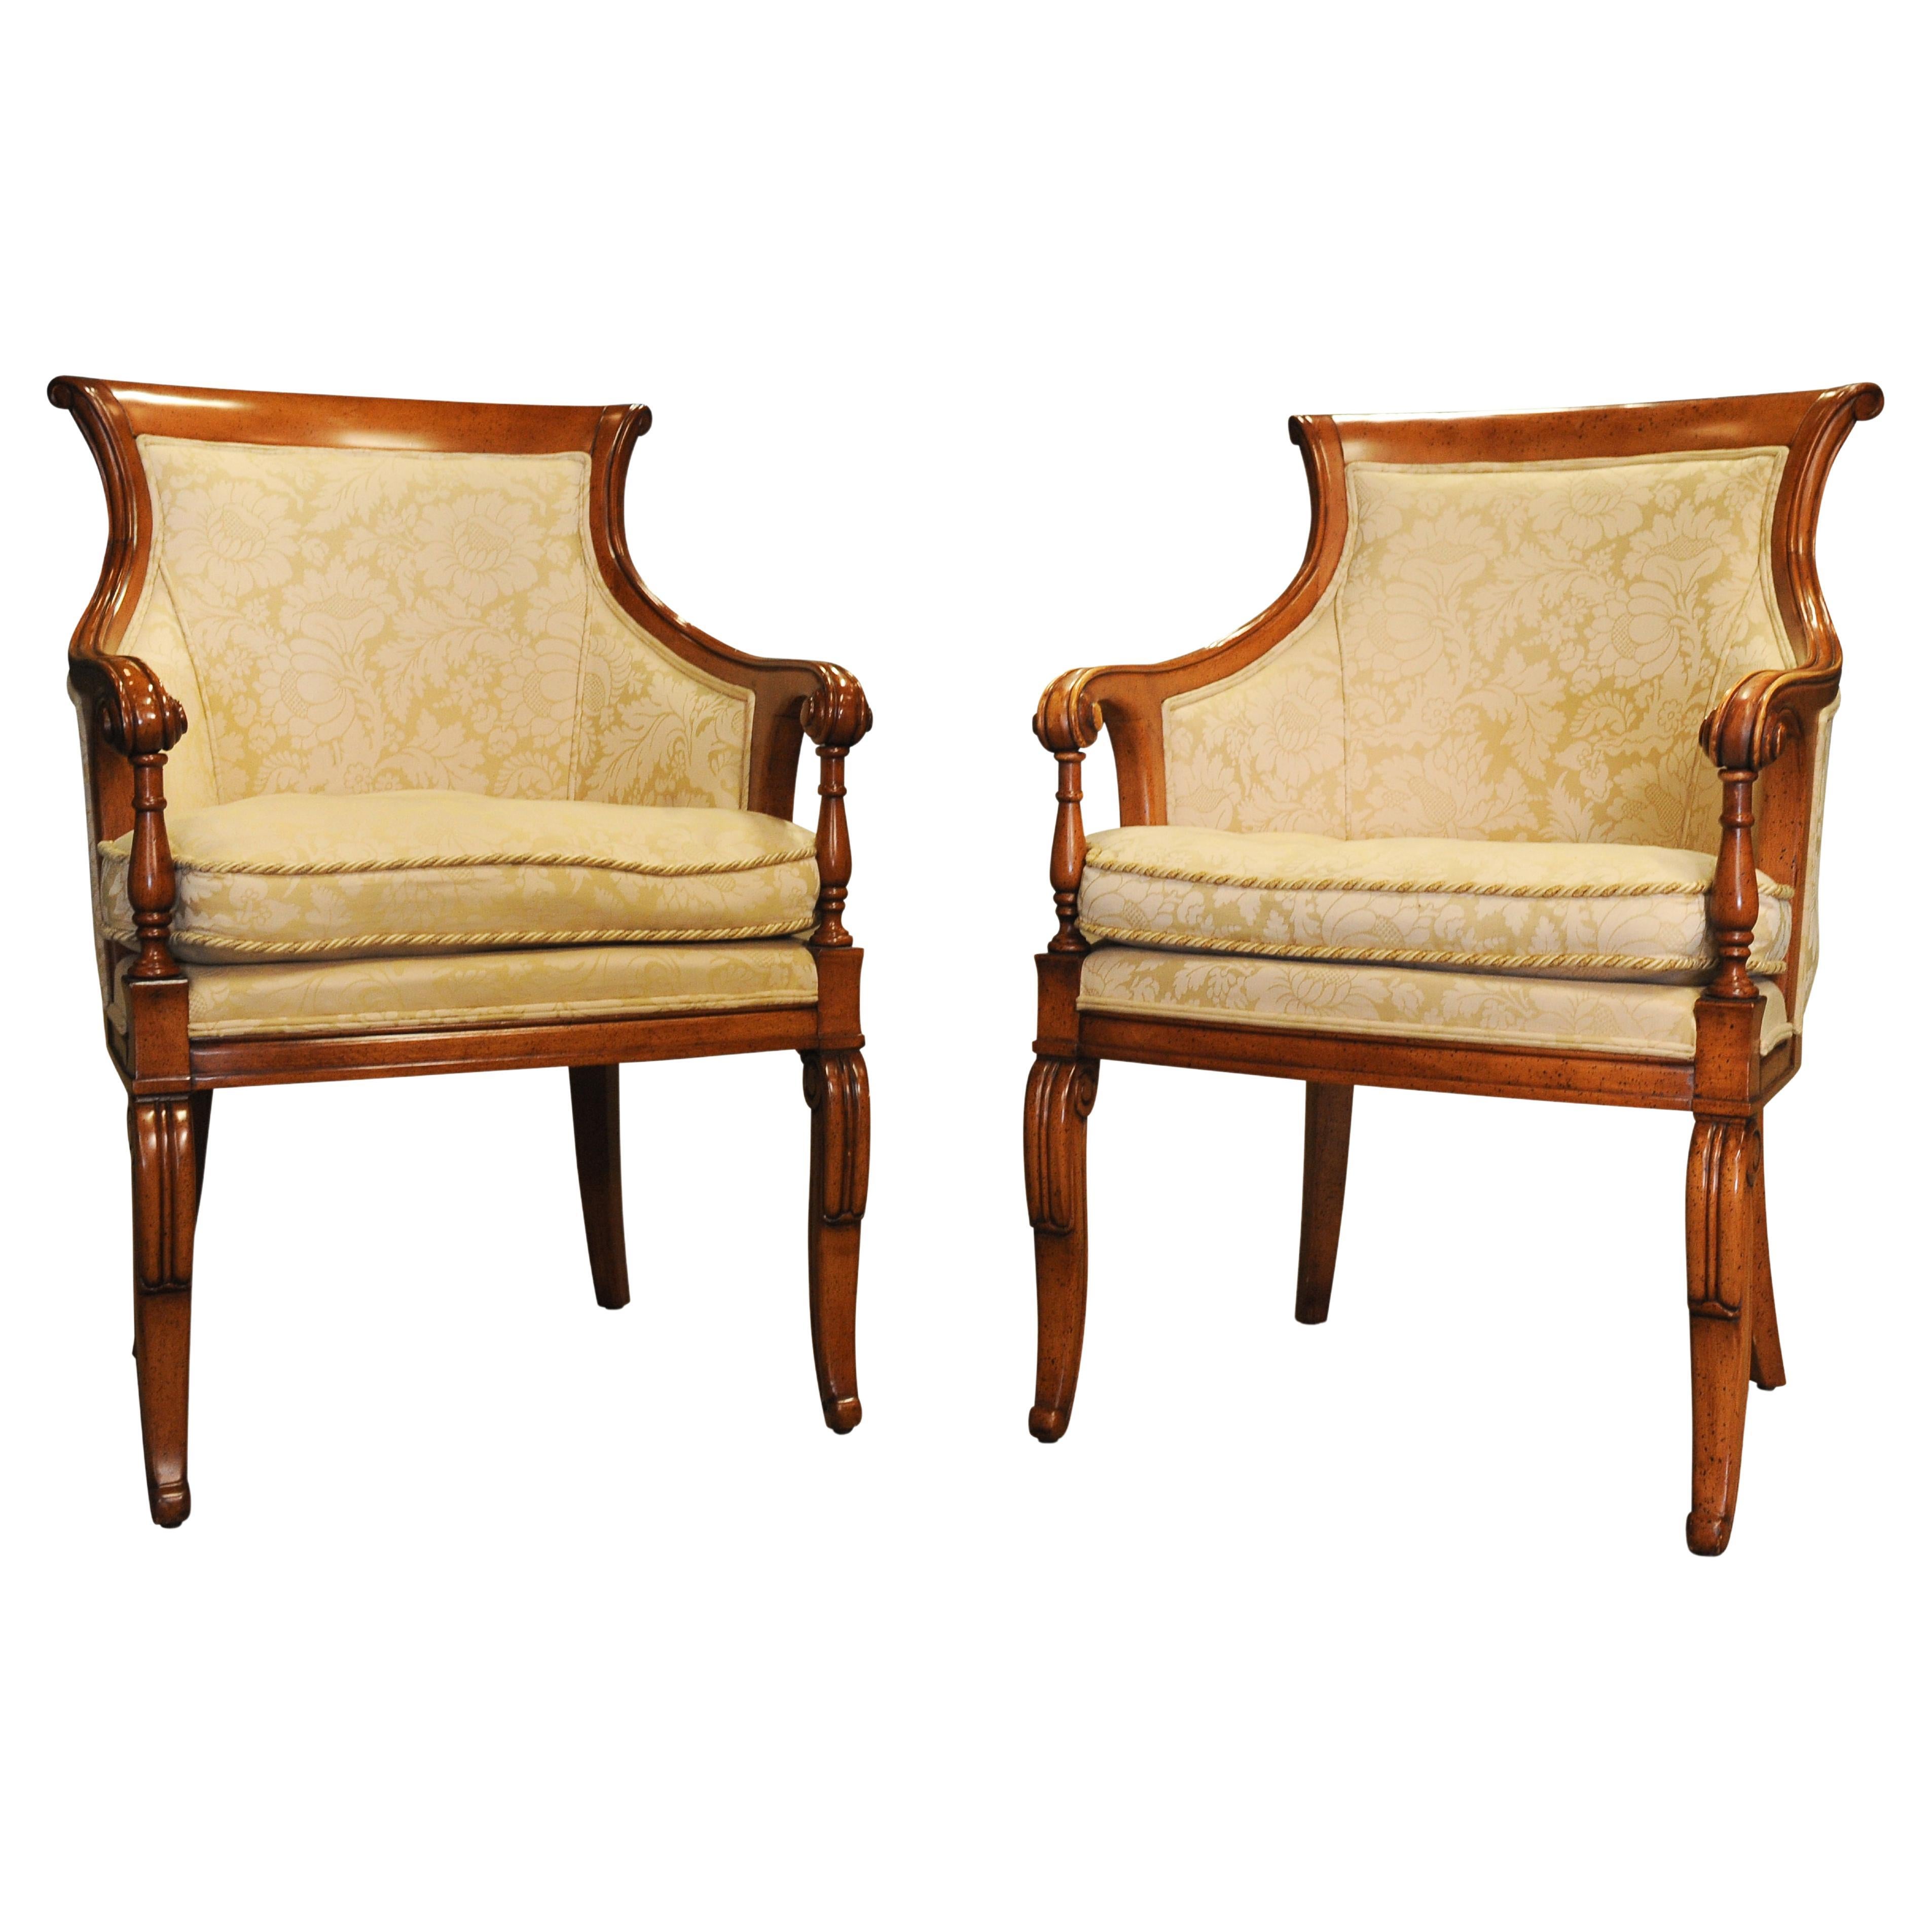 Elegant Pair of William IV Design Bergere Armchairs With Cream Damask Upholstery